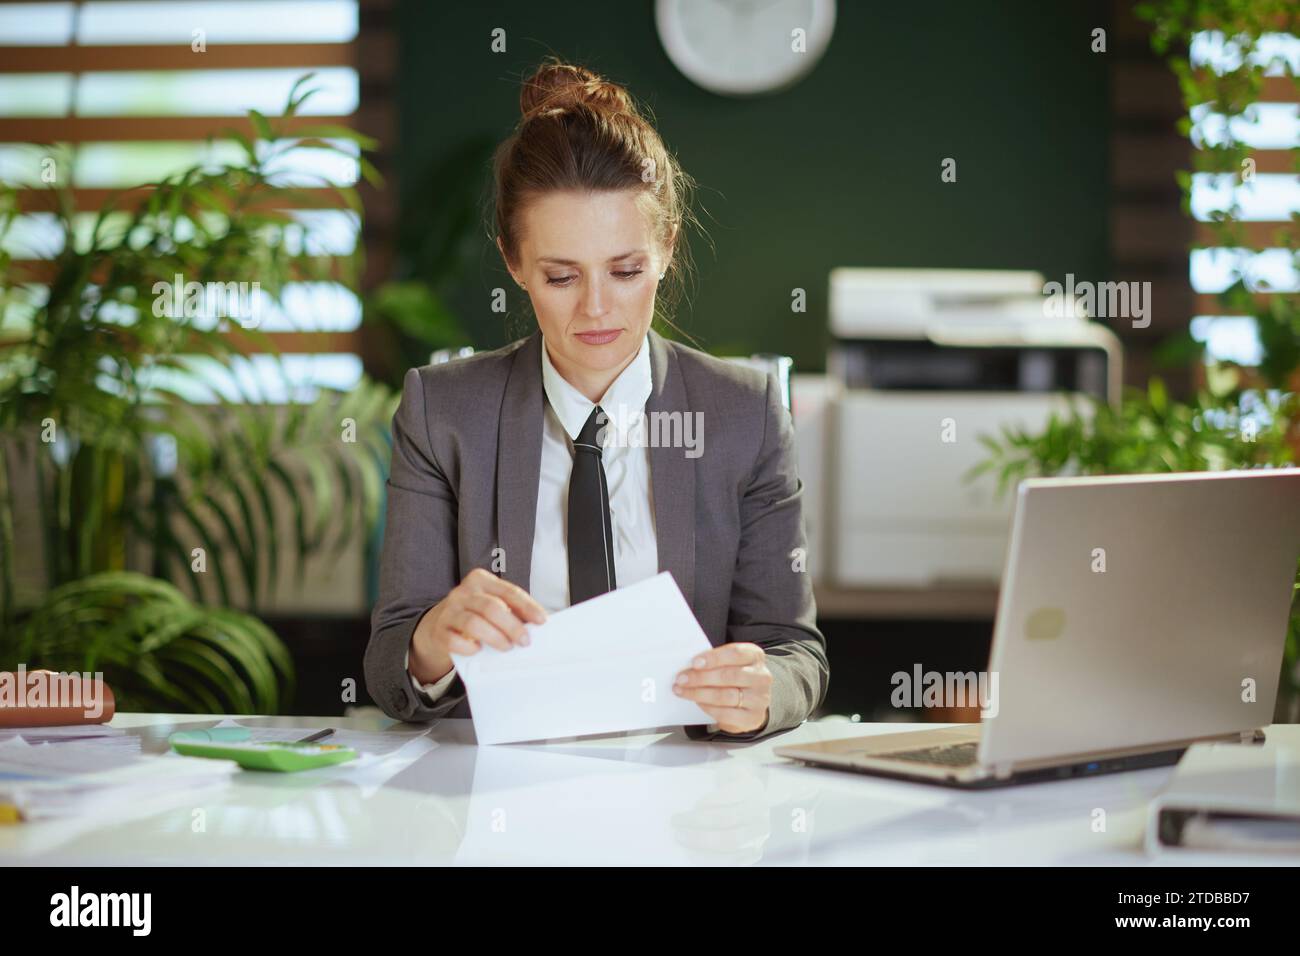 New job. pensive modern 40 years old woman employee in modern green office in grey business suit with laptop opening letter. Stock Photo